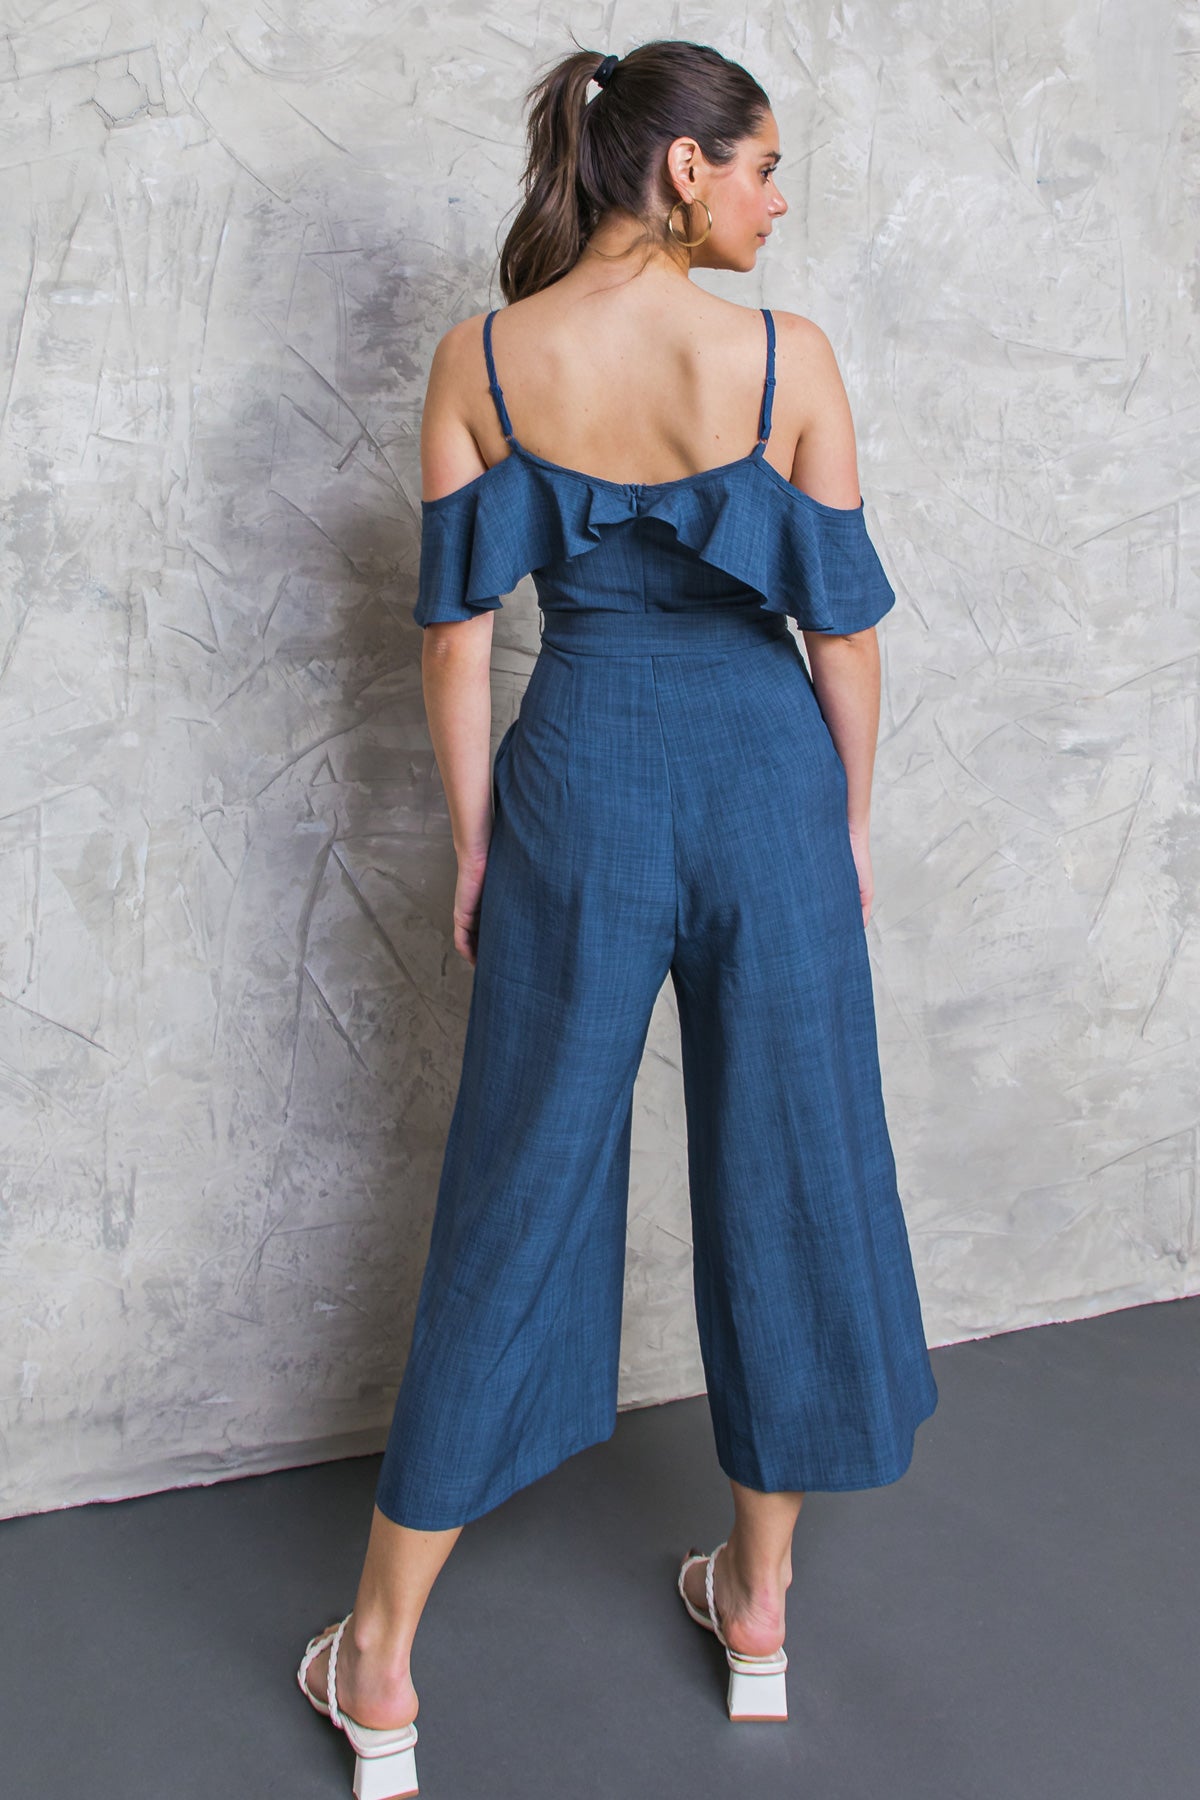 SING ME BACK HOME WOVEN JUMPSUIT